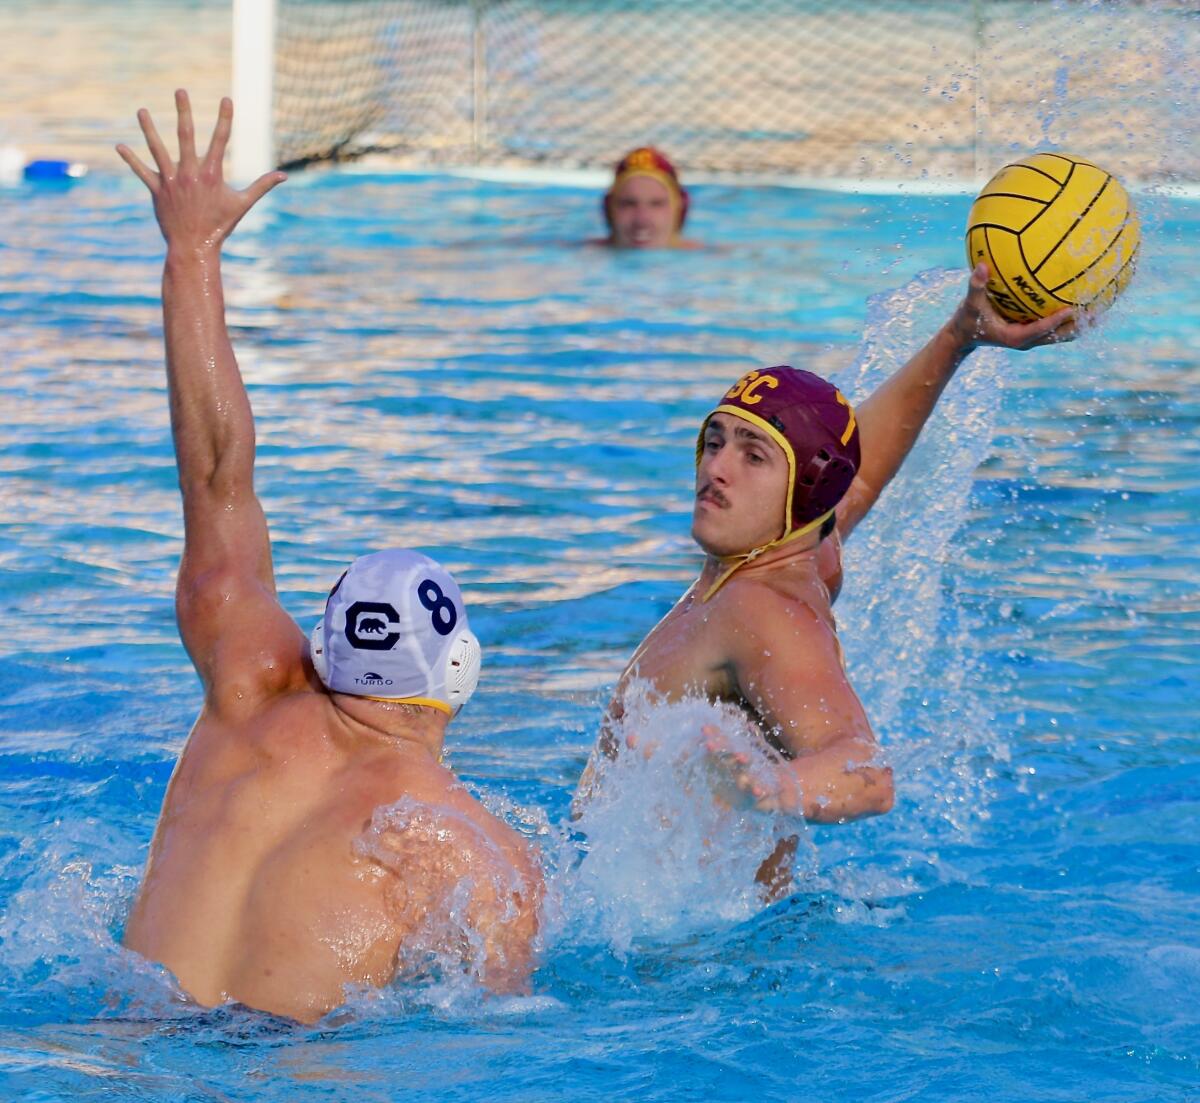 The UC Berkeley and USC men's water polo teams play in the 2021 NCAA championship in Los Angeles.